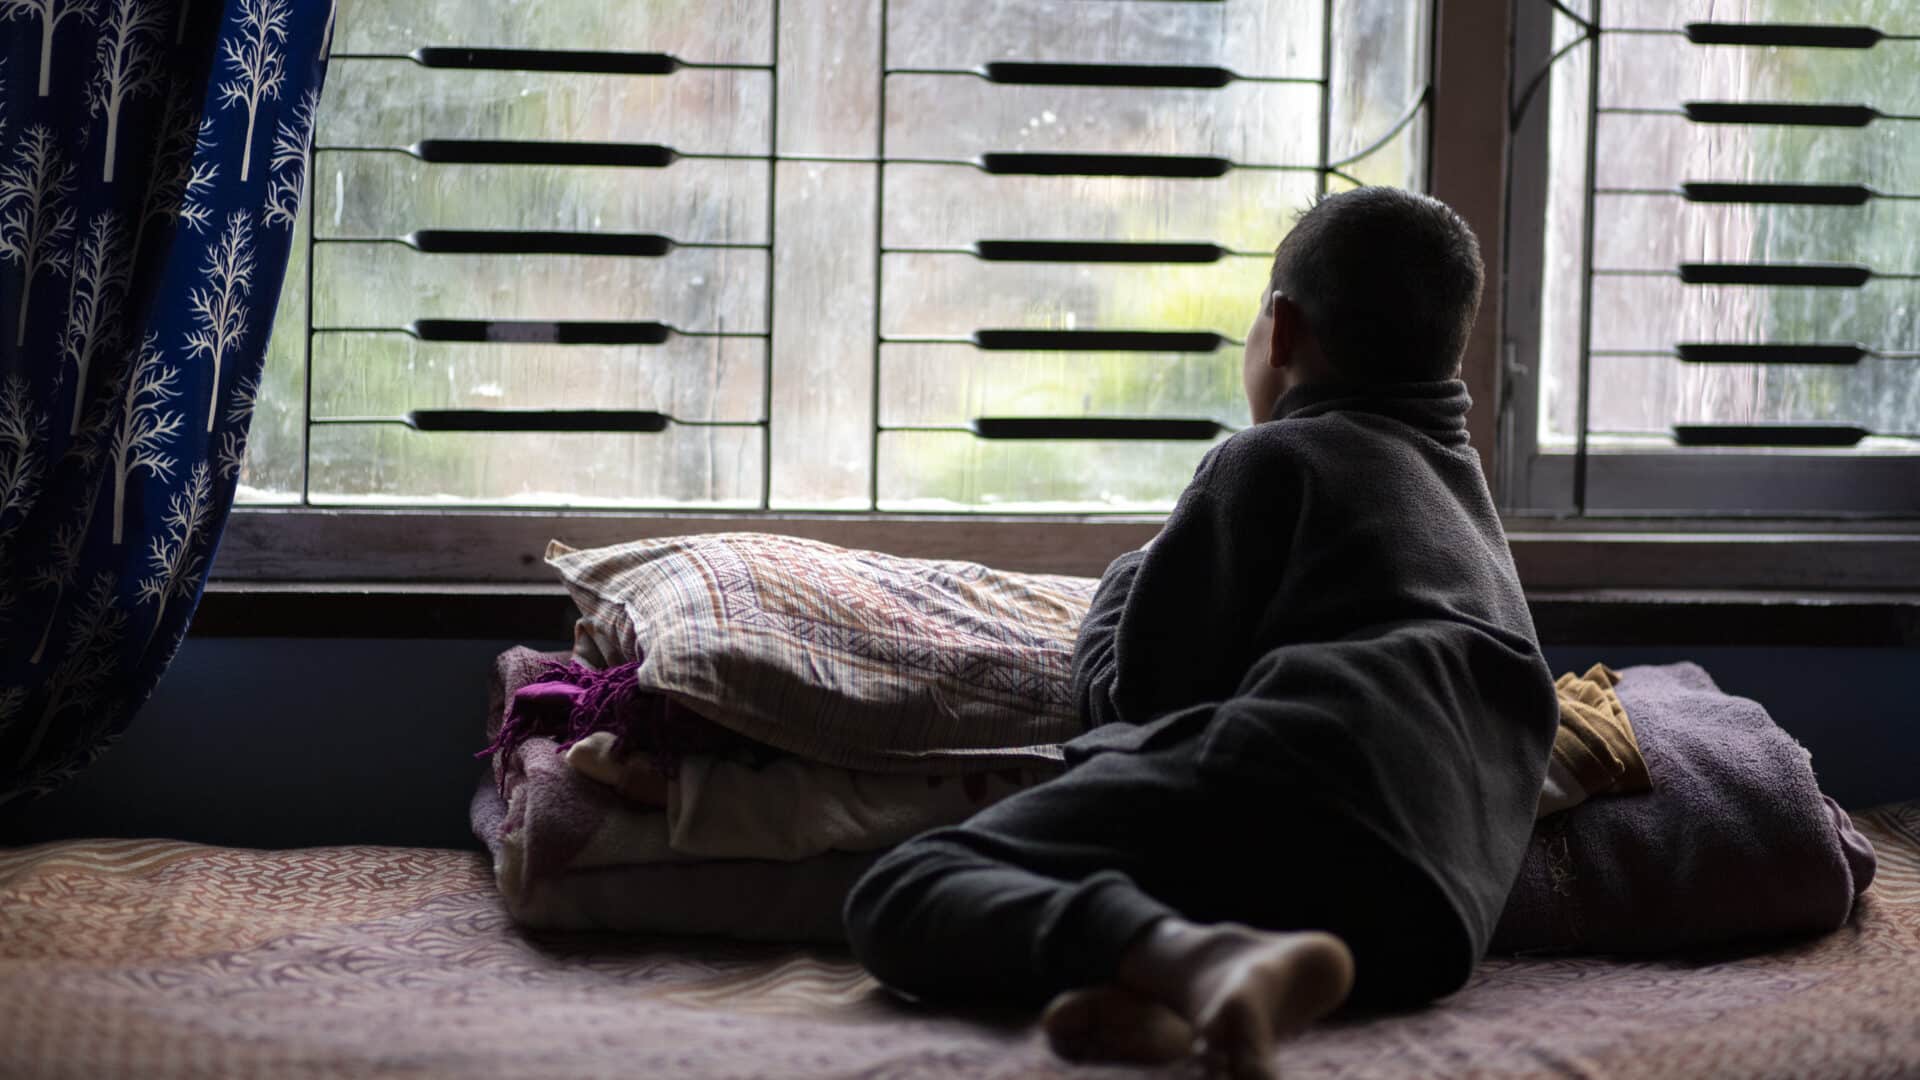 A nepalese child with their back turned gazes sadly out of the barred windows of an orphanage